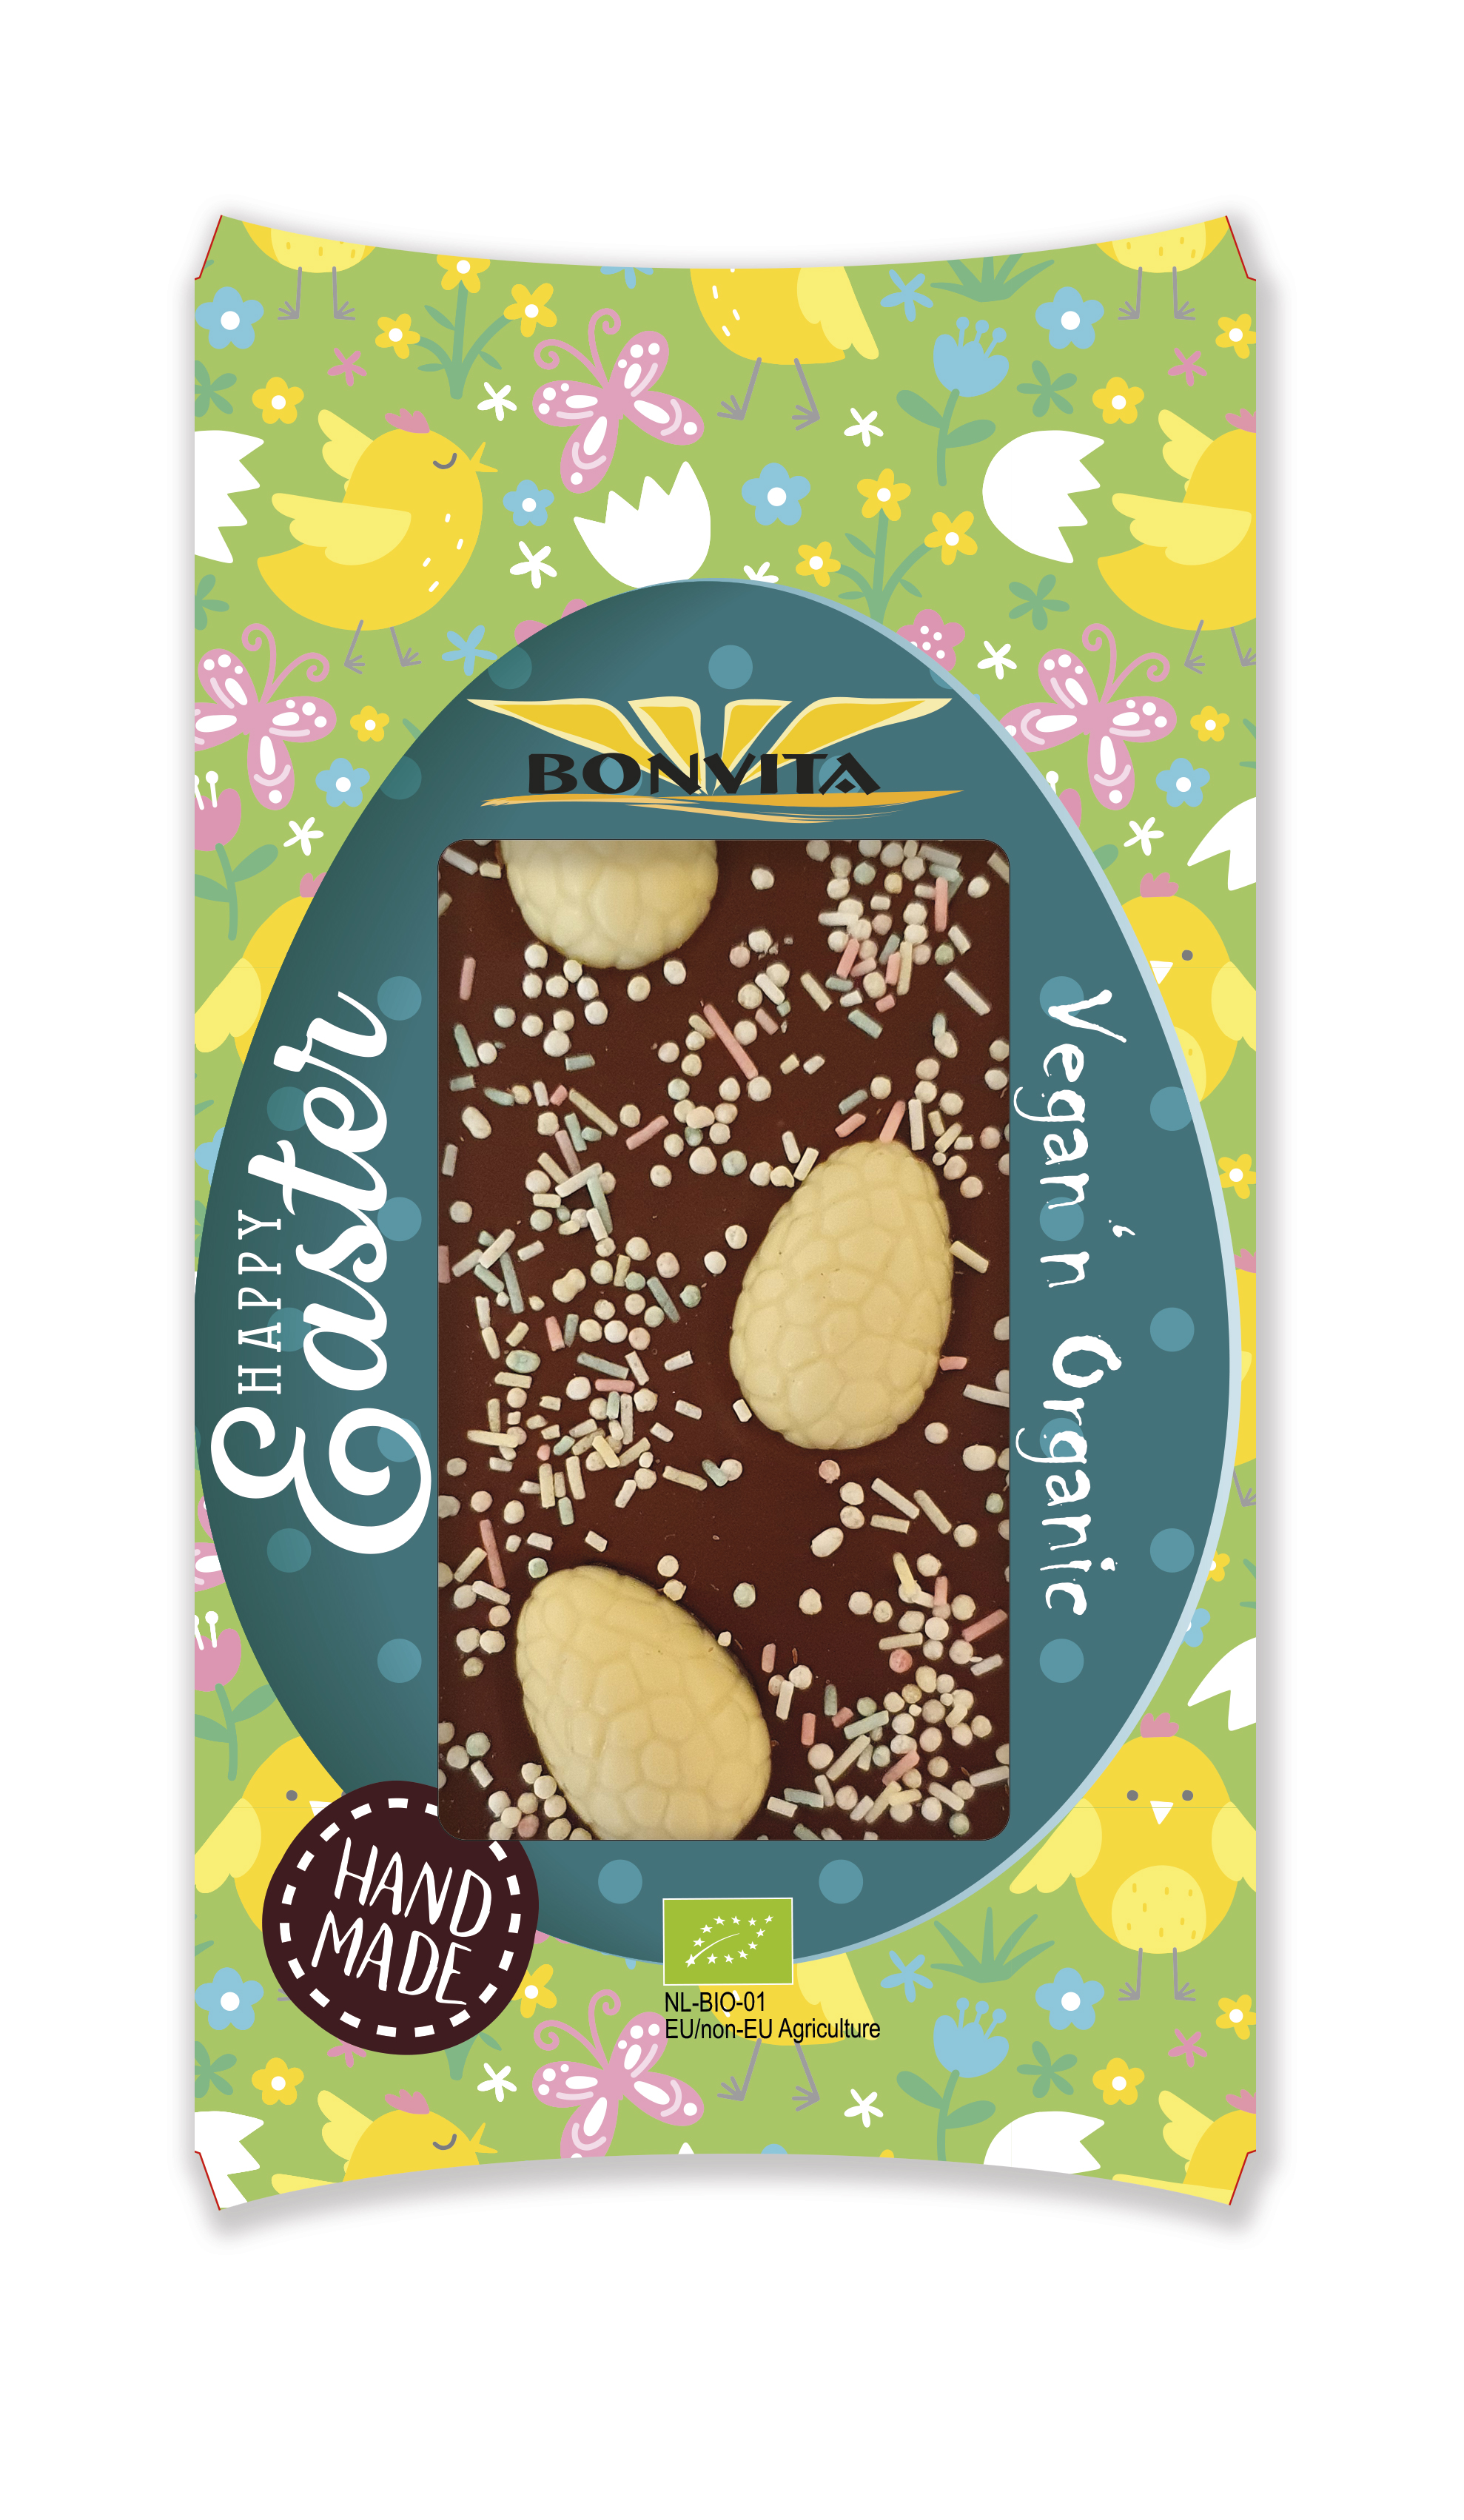 Rice choc bar, white eggs, colored sprinkles